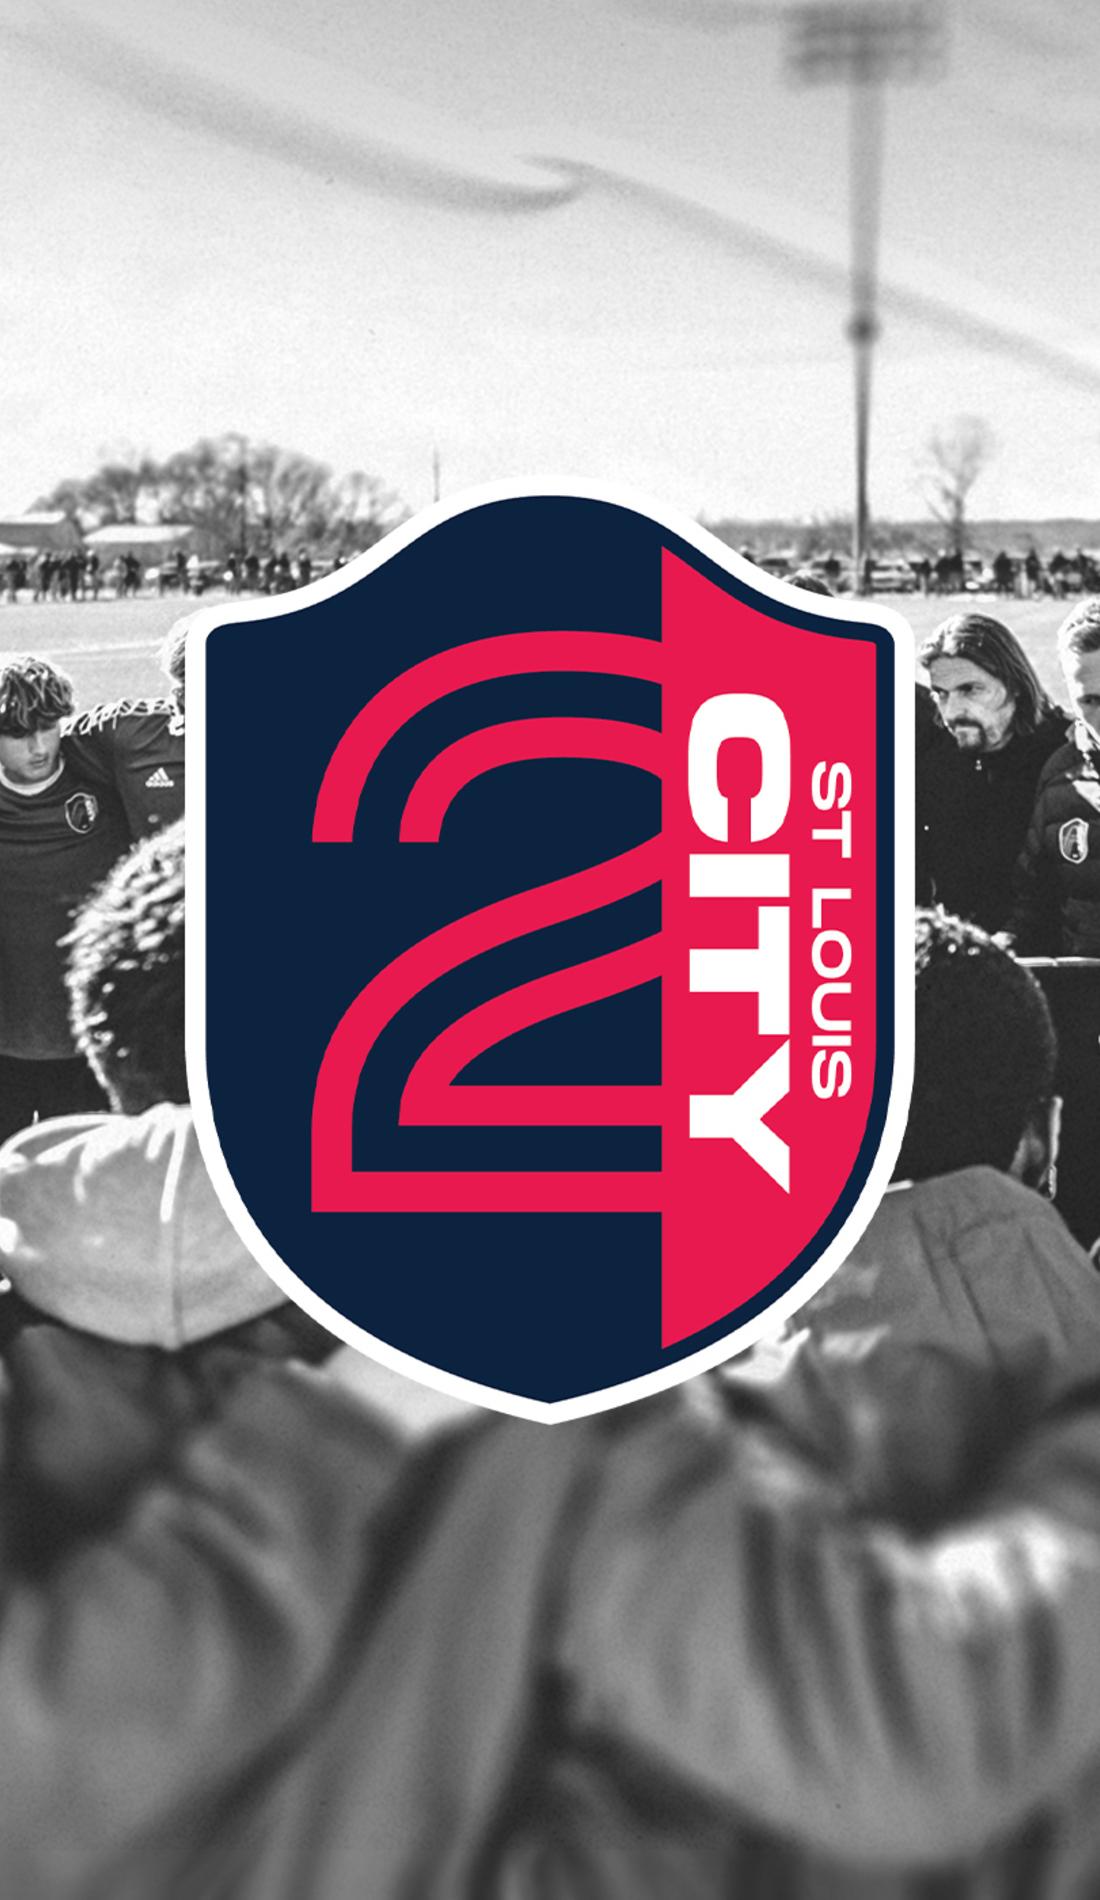 Get to know these St. Louis CITY SC stars before 2023 season